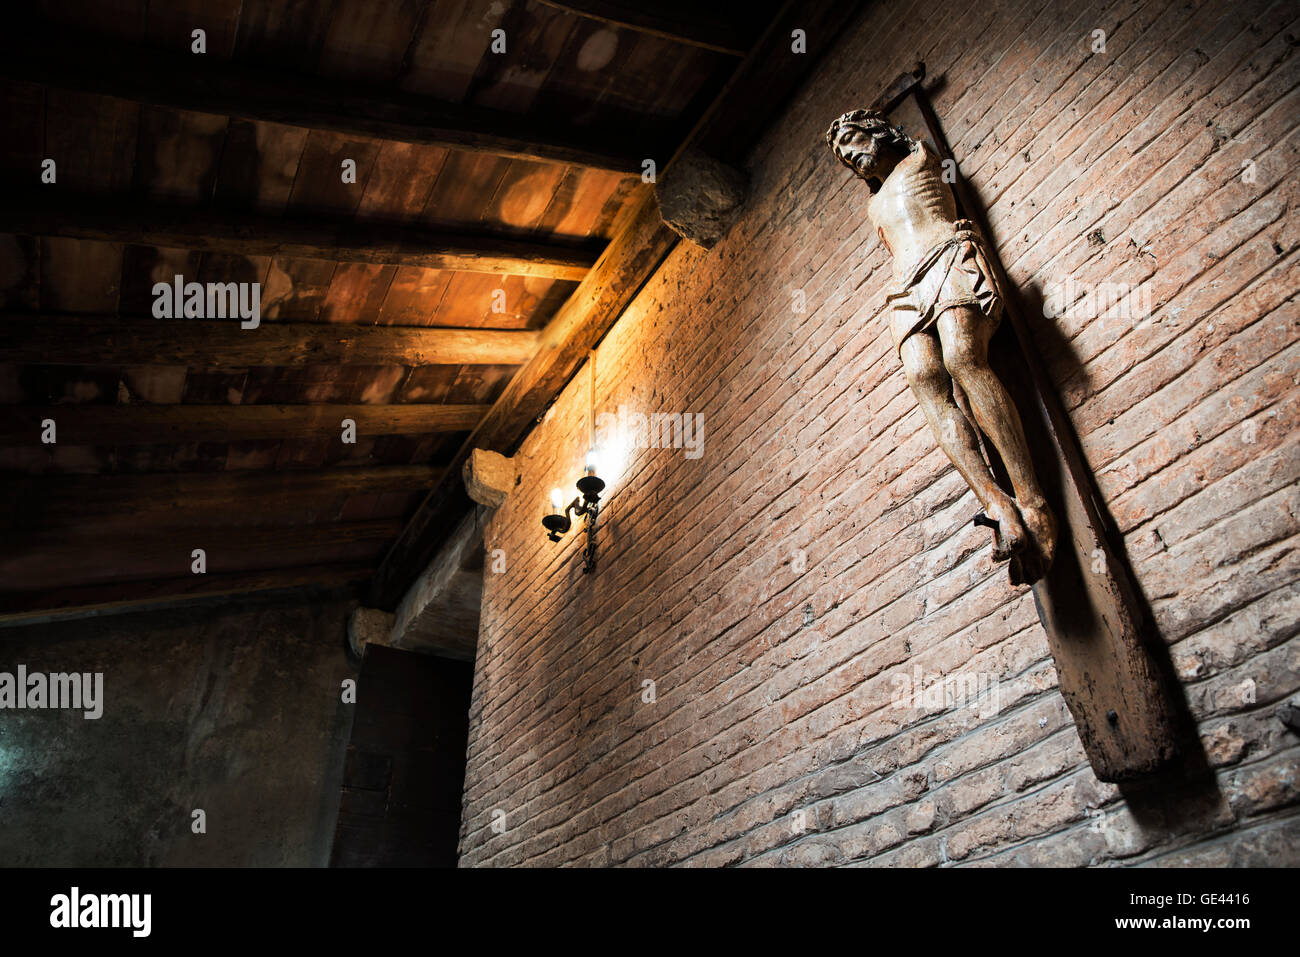 jesus christ on the cross without arms in ancient castle in twilight Stock Photo